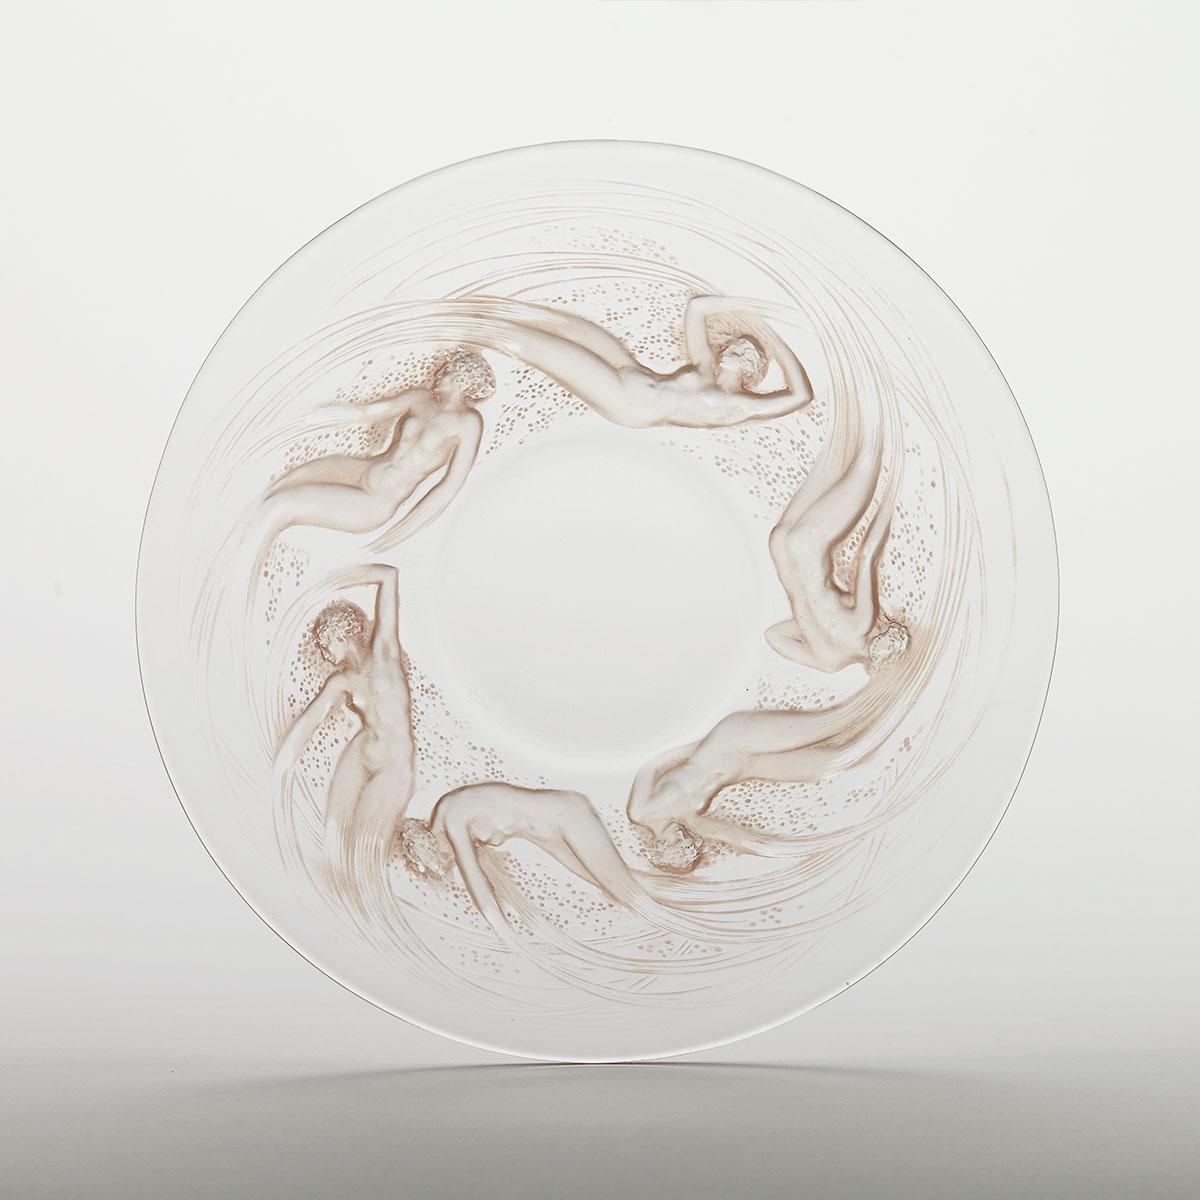 ‘Ondines’, Lalique Moulded and Brown Stained Glass Plate, c.1930